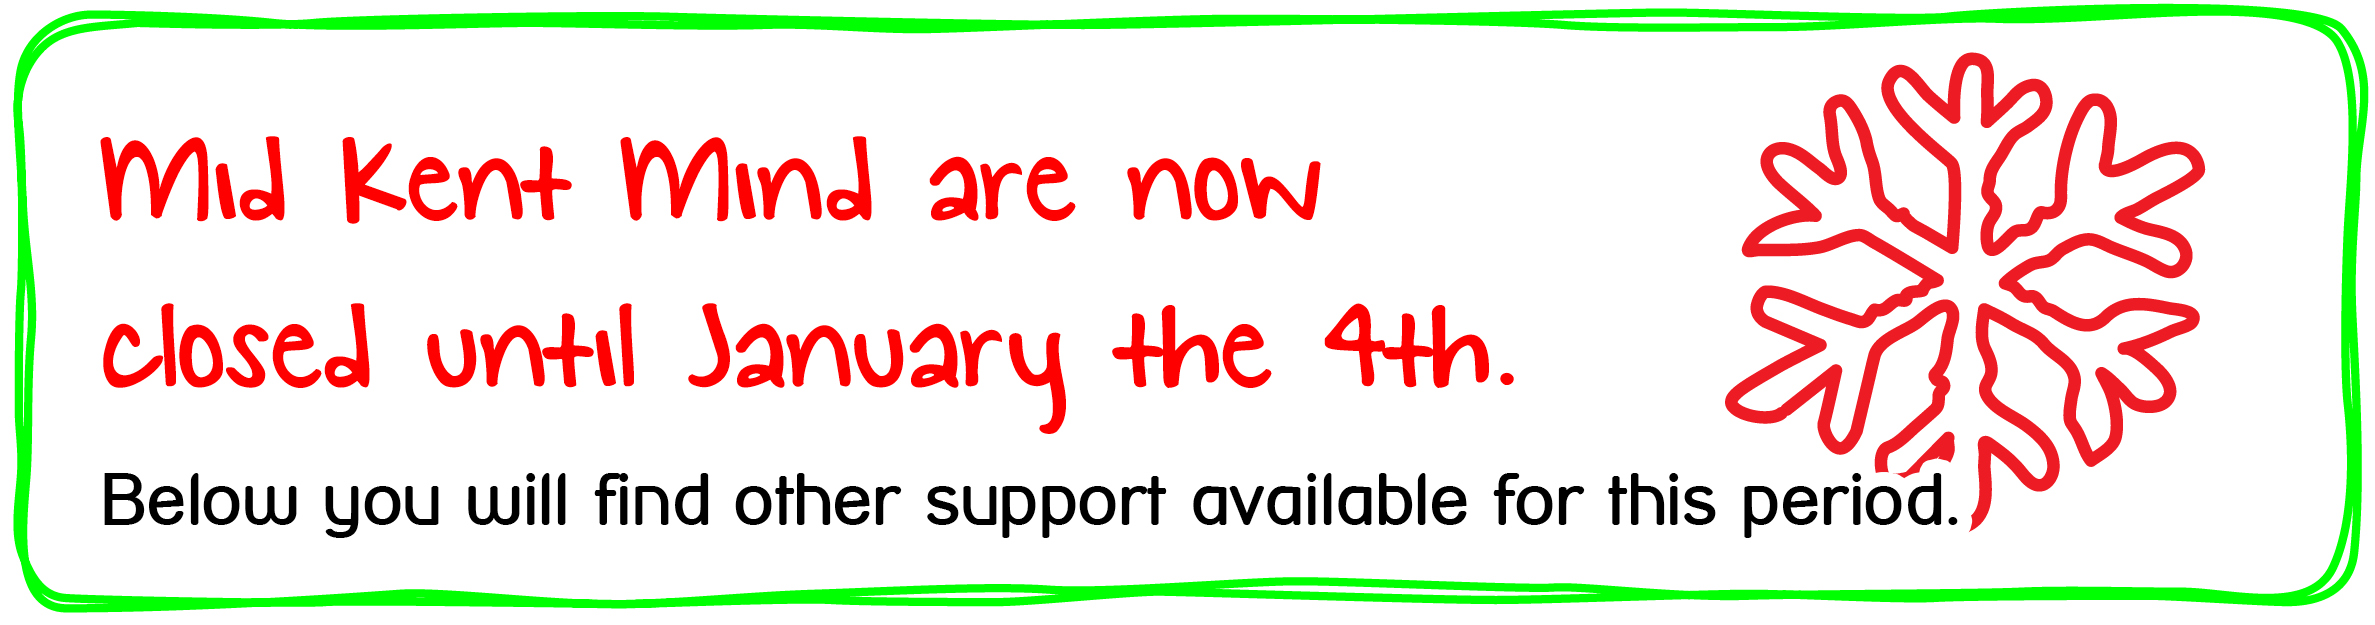 Mid Kent Mind are now closed until January the 4th. Below you will find other support available for this period.